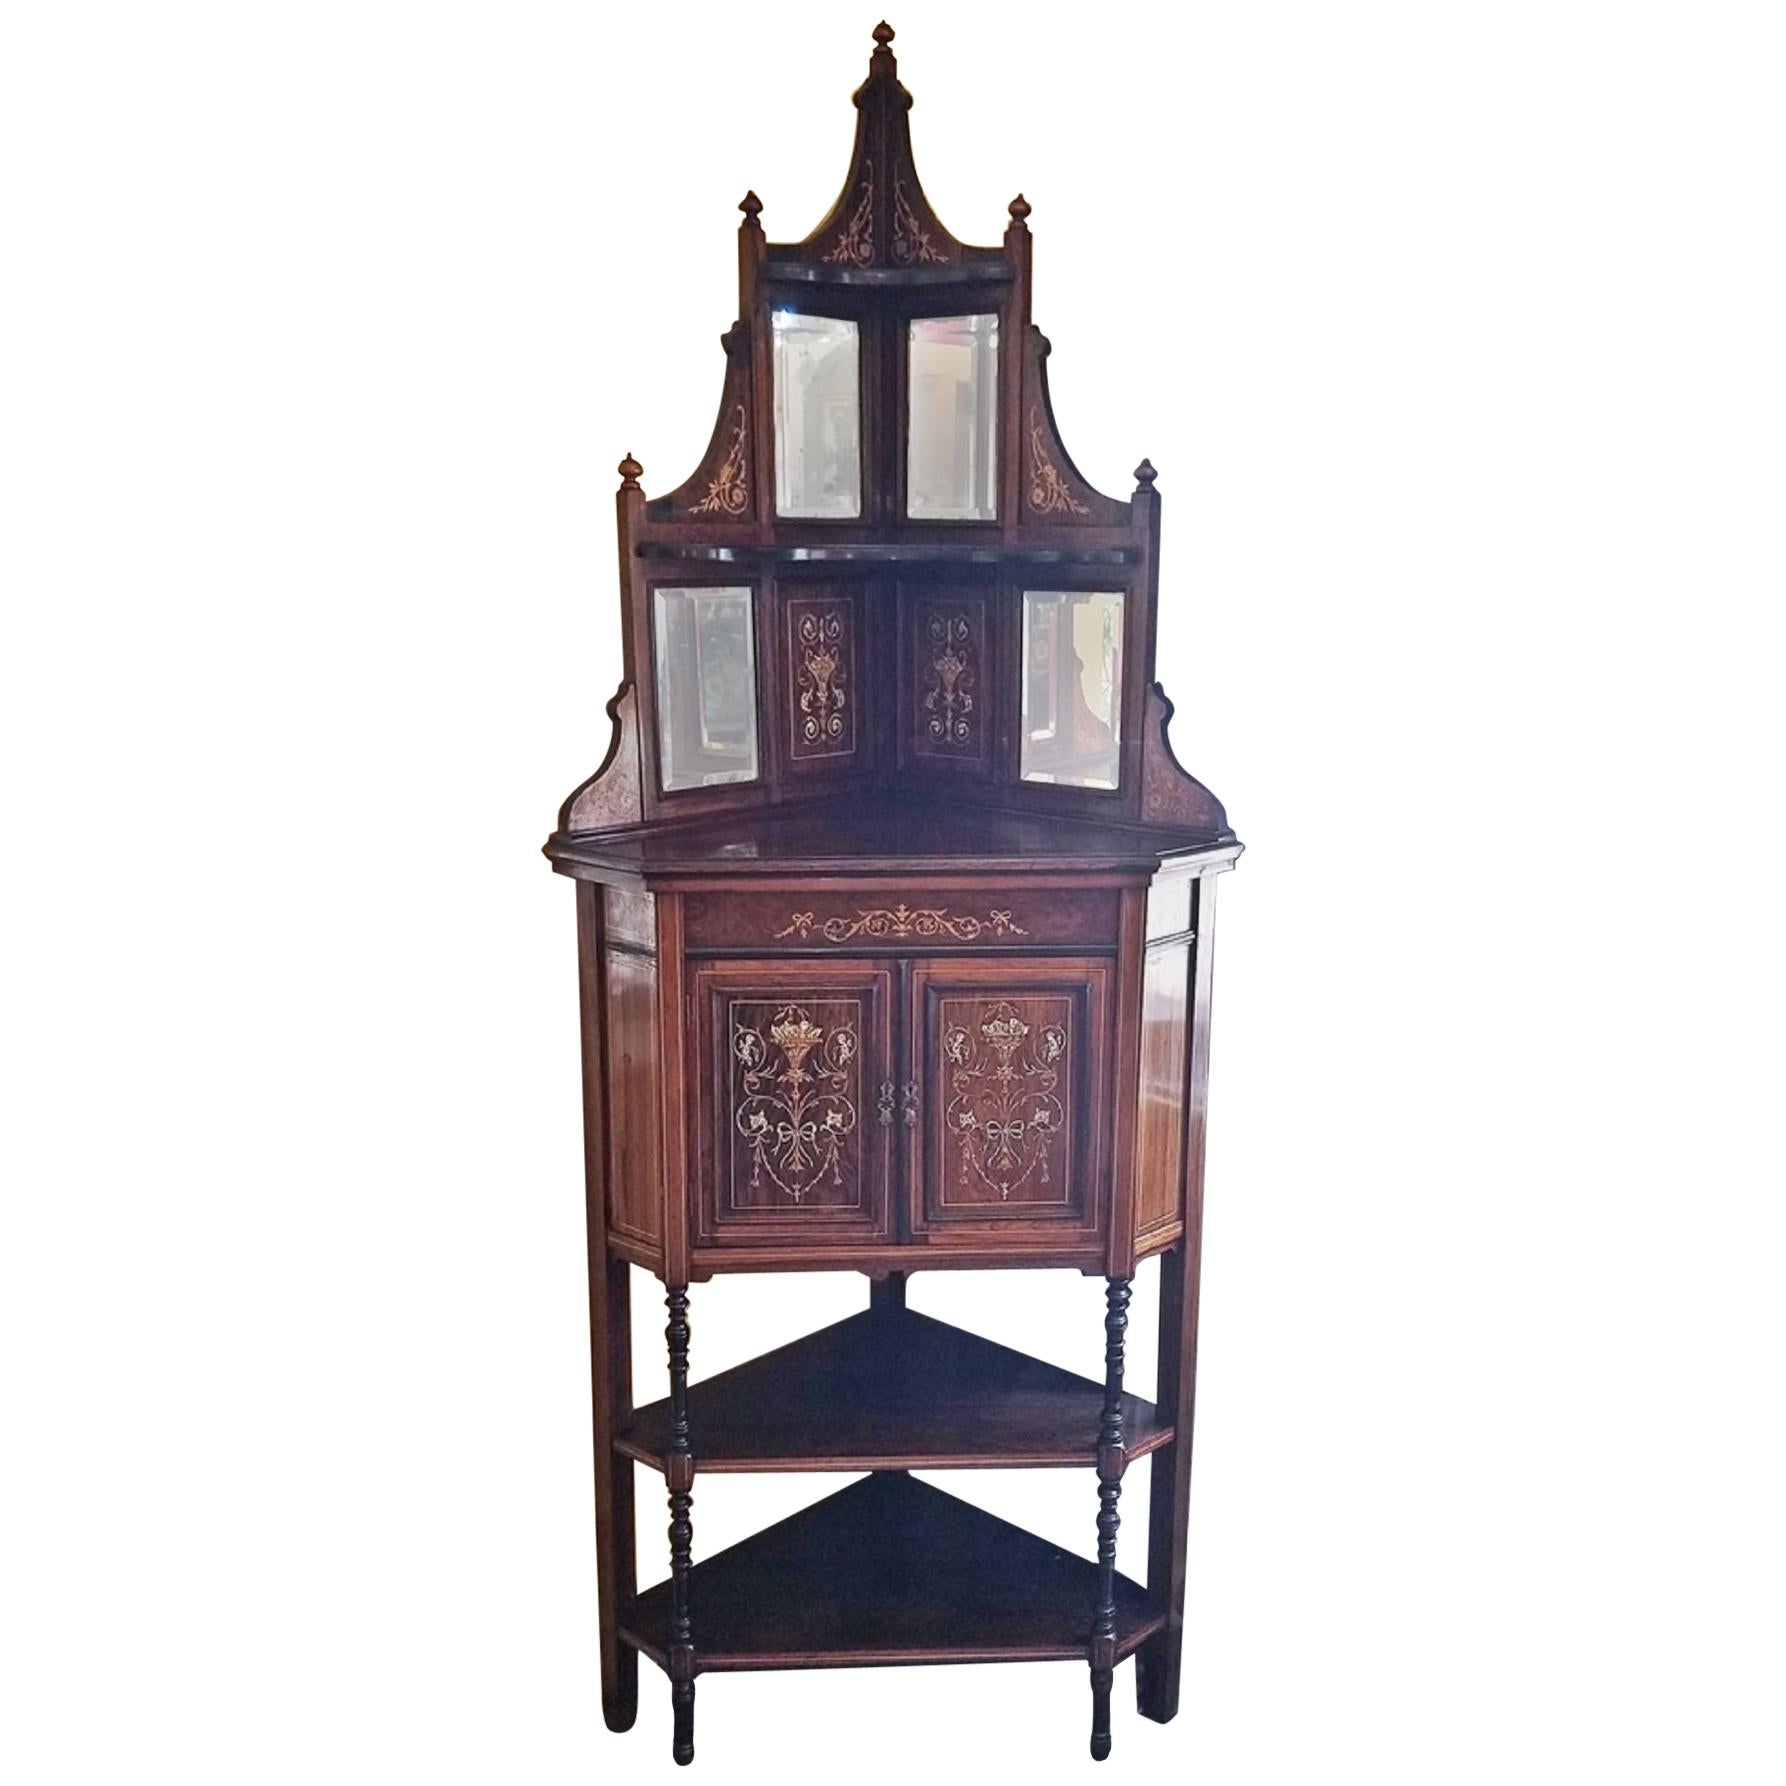 19th Century English Corner Cabinet Attributed to Collinson and Lock